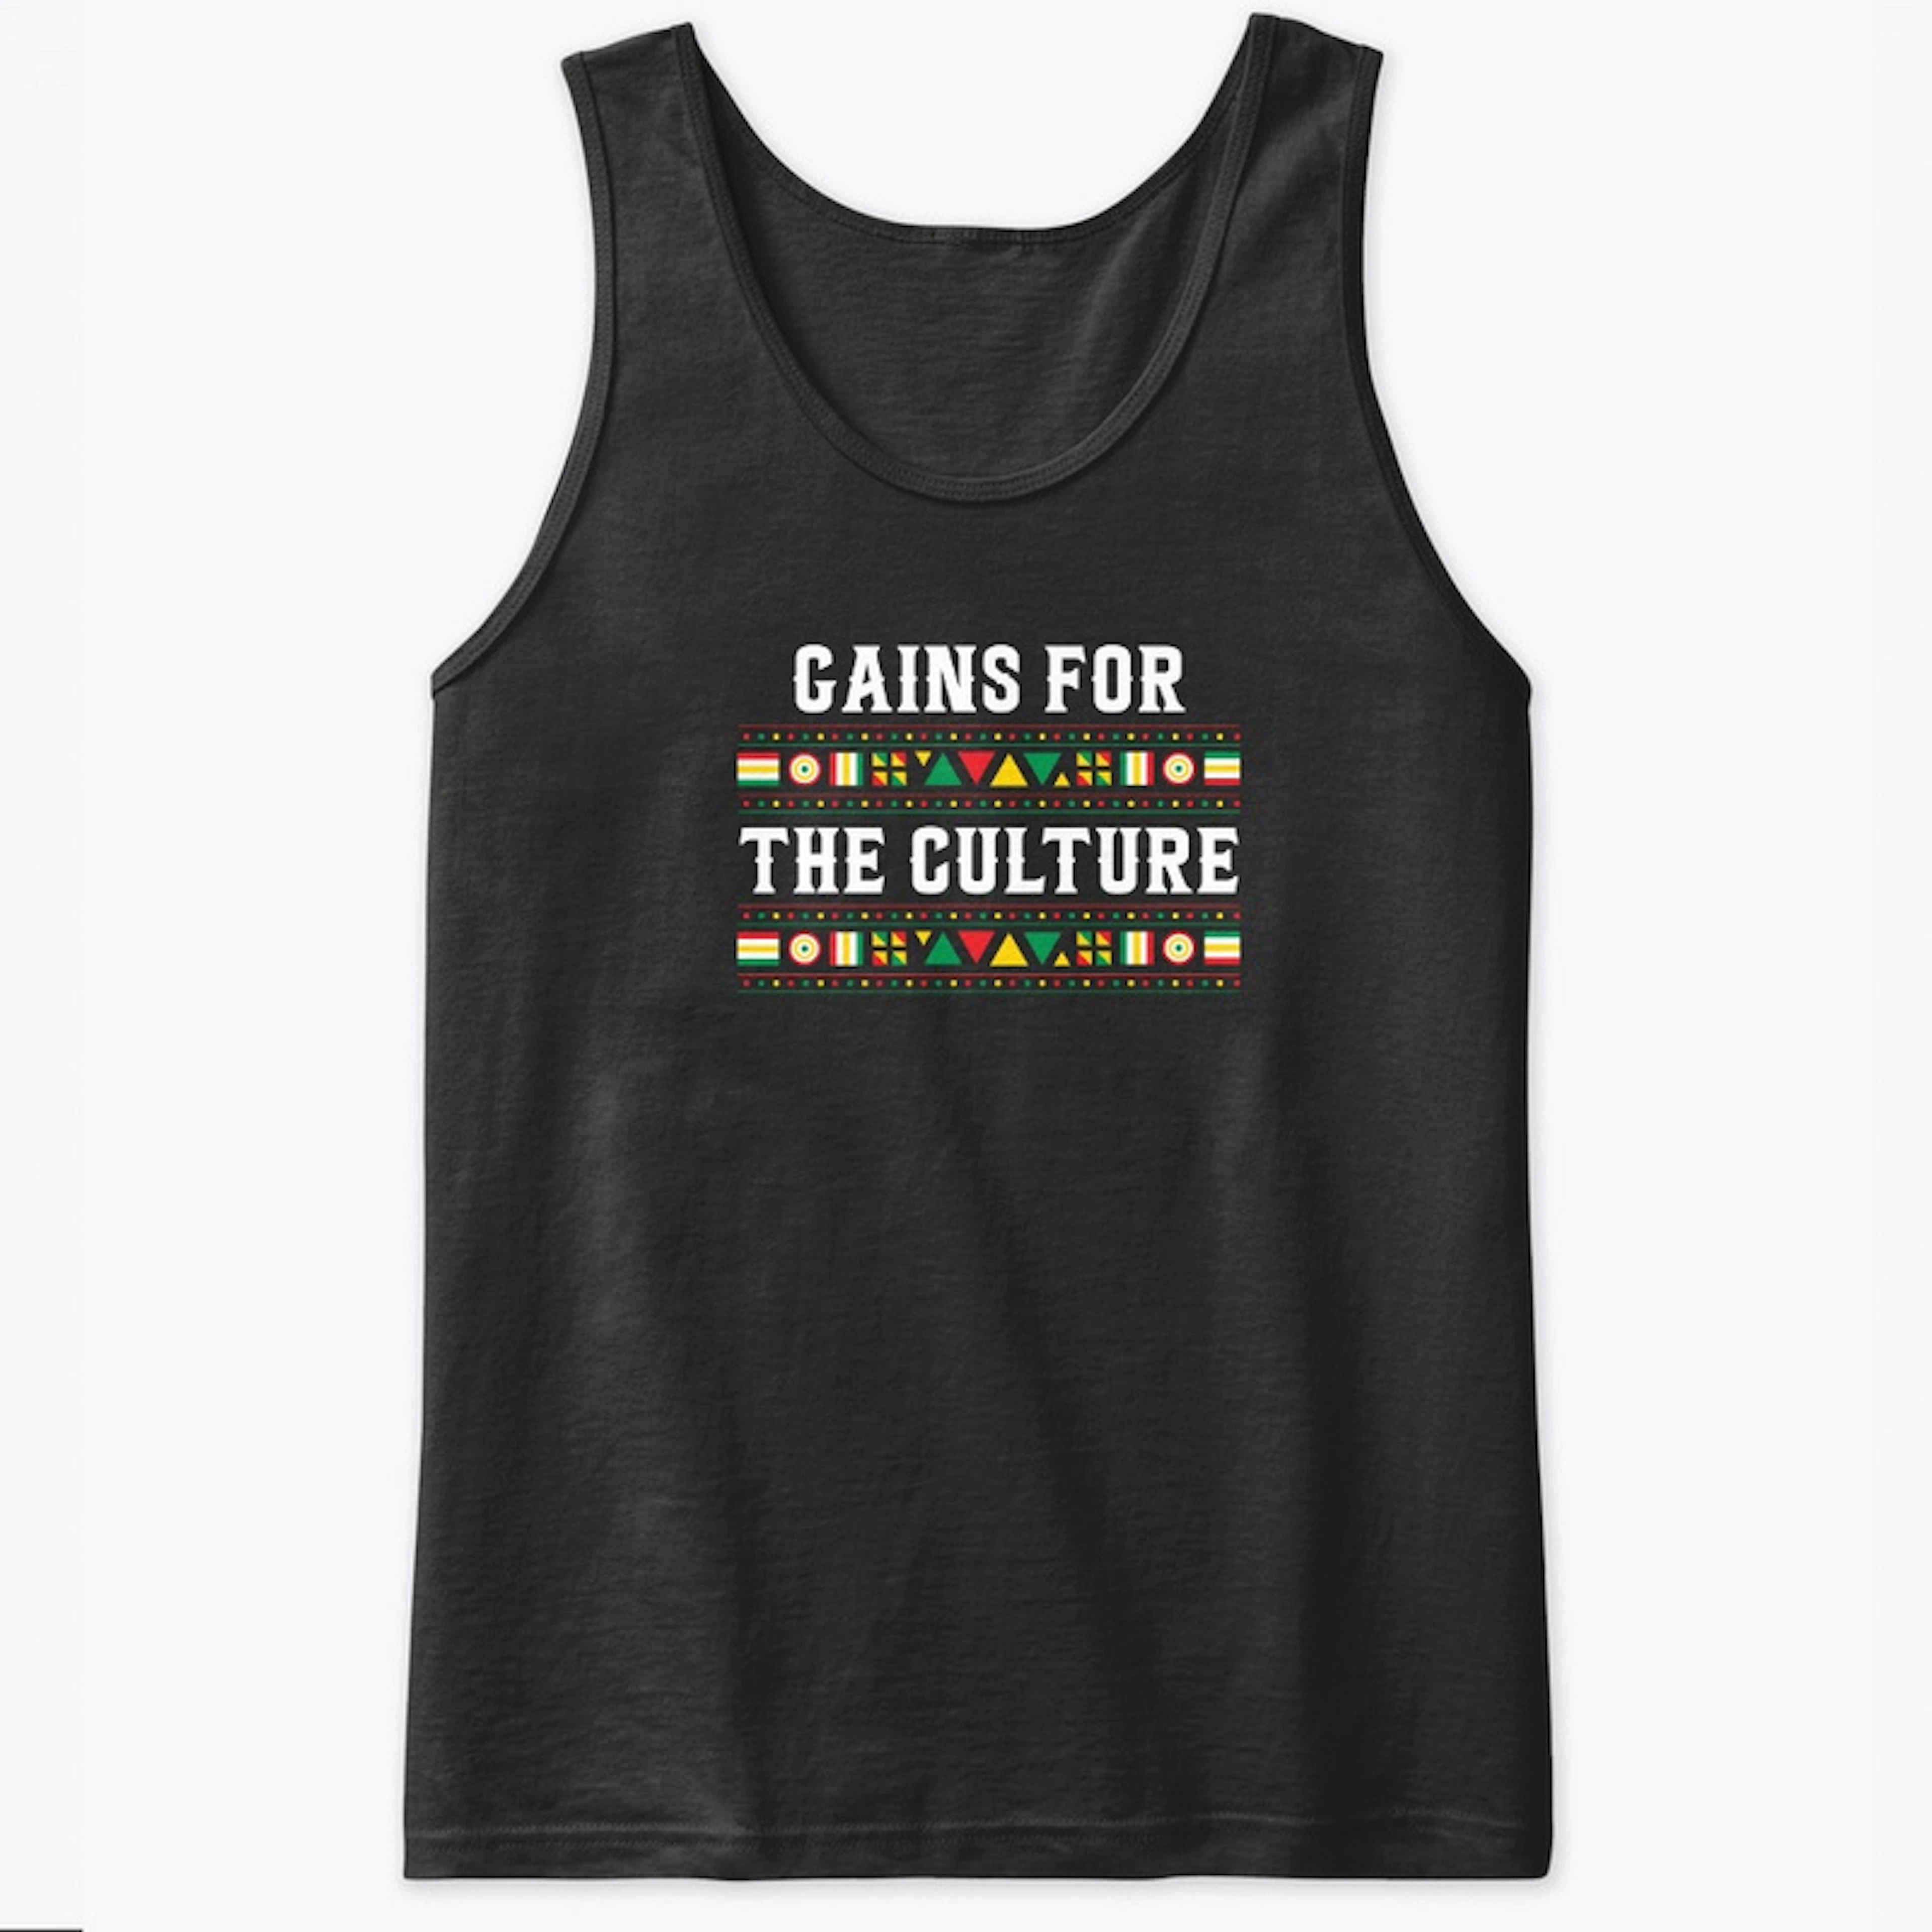 Gains For The Culture (B)